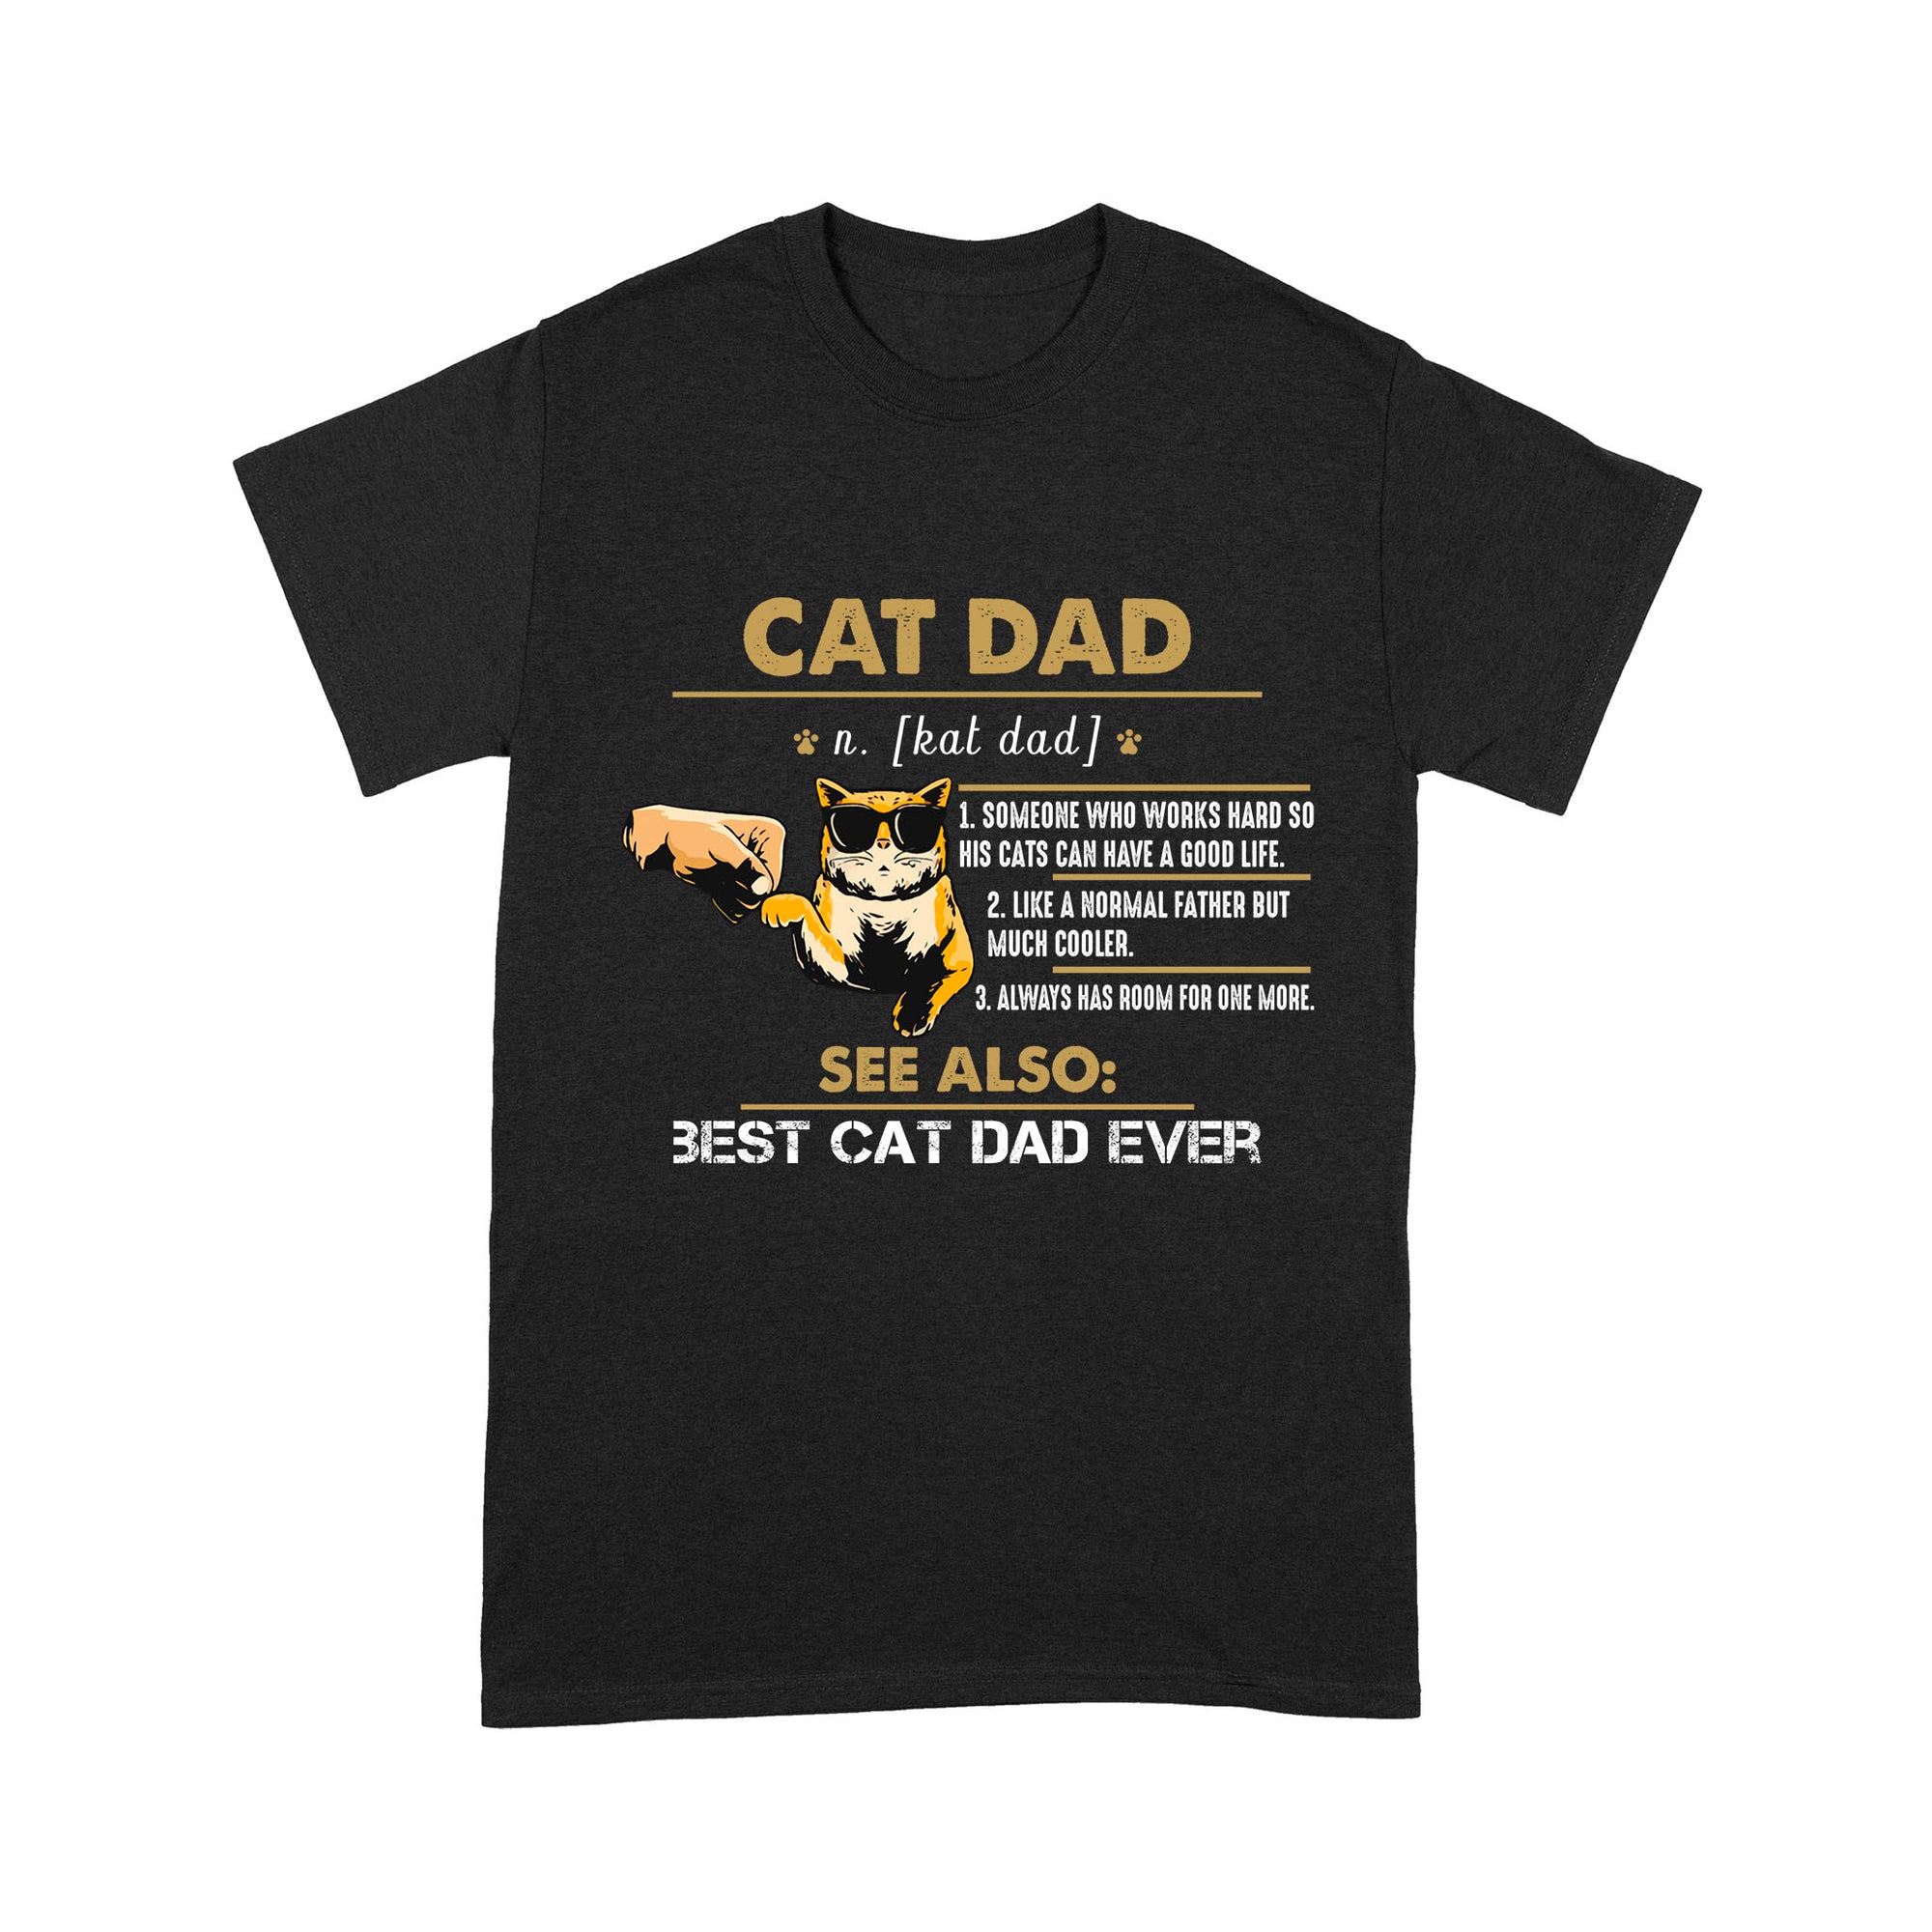 Premium T-shirt - Cat Lover Cat Dad Someone Who Works Hard So His Cats Can Have A Good Life Like A Normal Father But Much Cooler